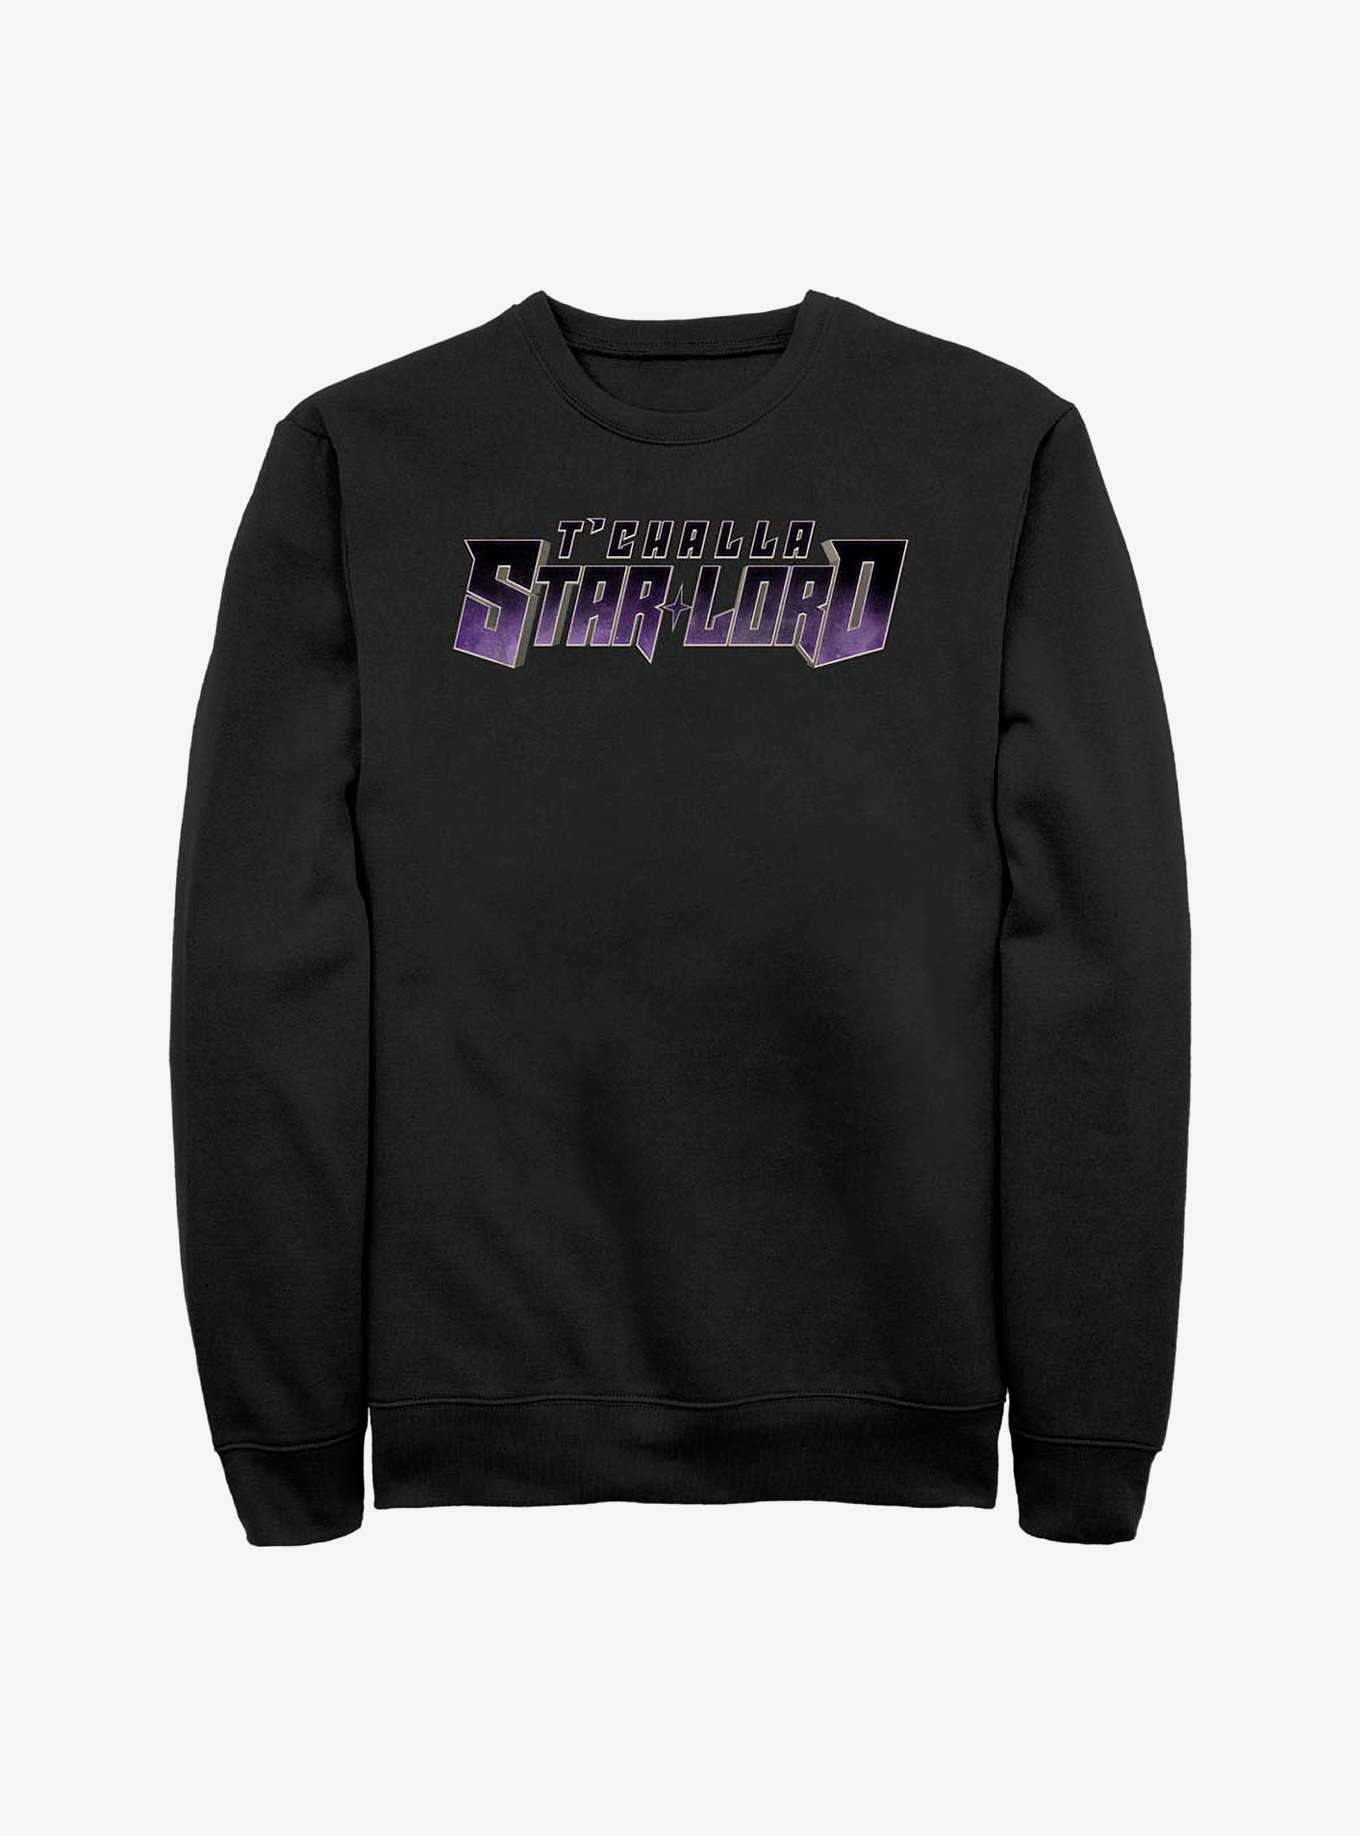 Marvel What If...? T'Challa Was Star-Lord Crew Sweatshirt, , hi-res